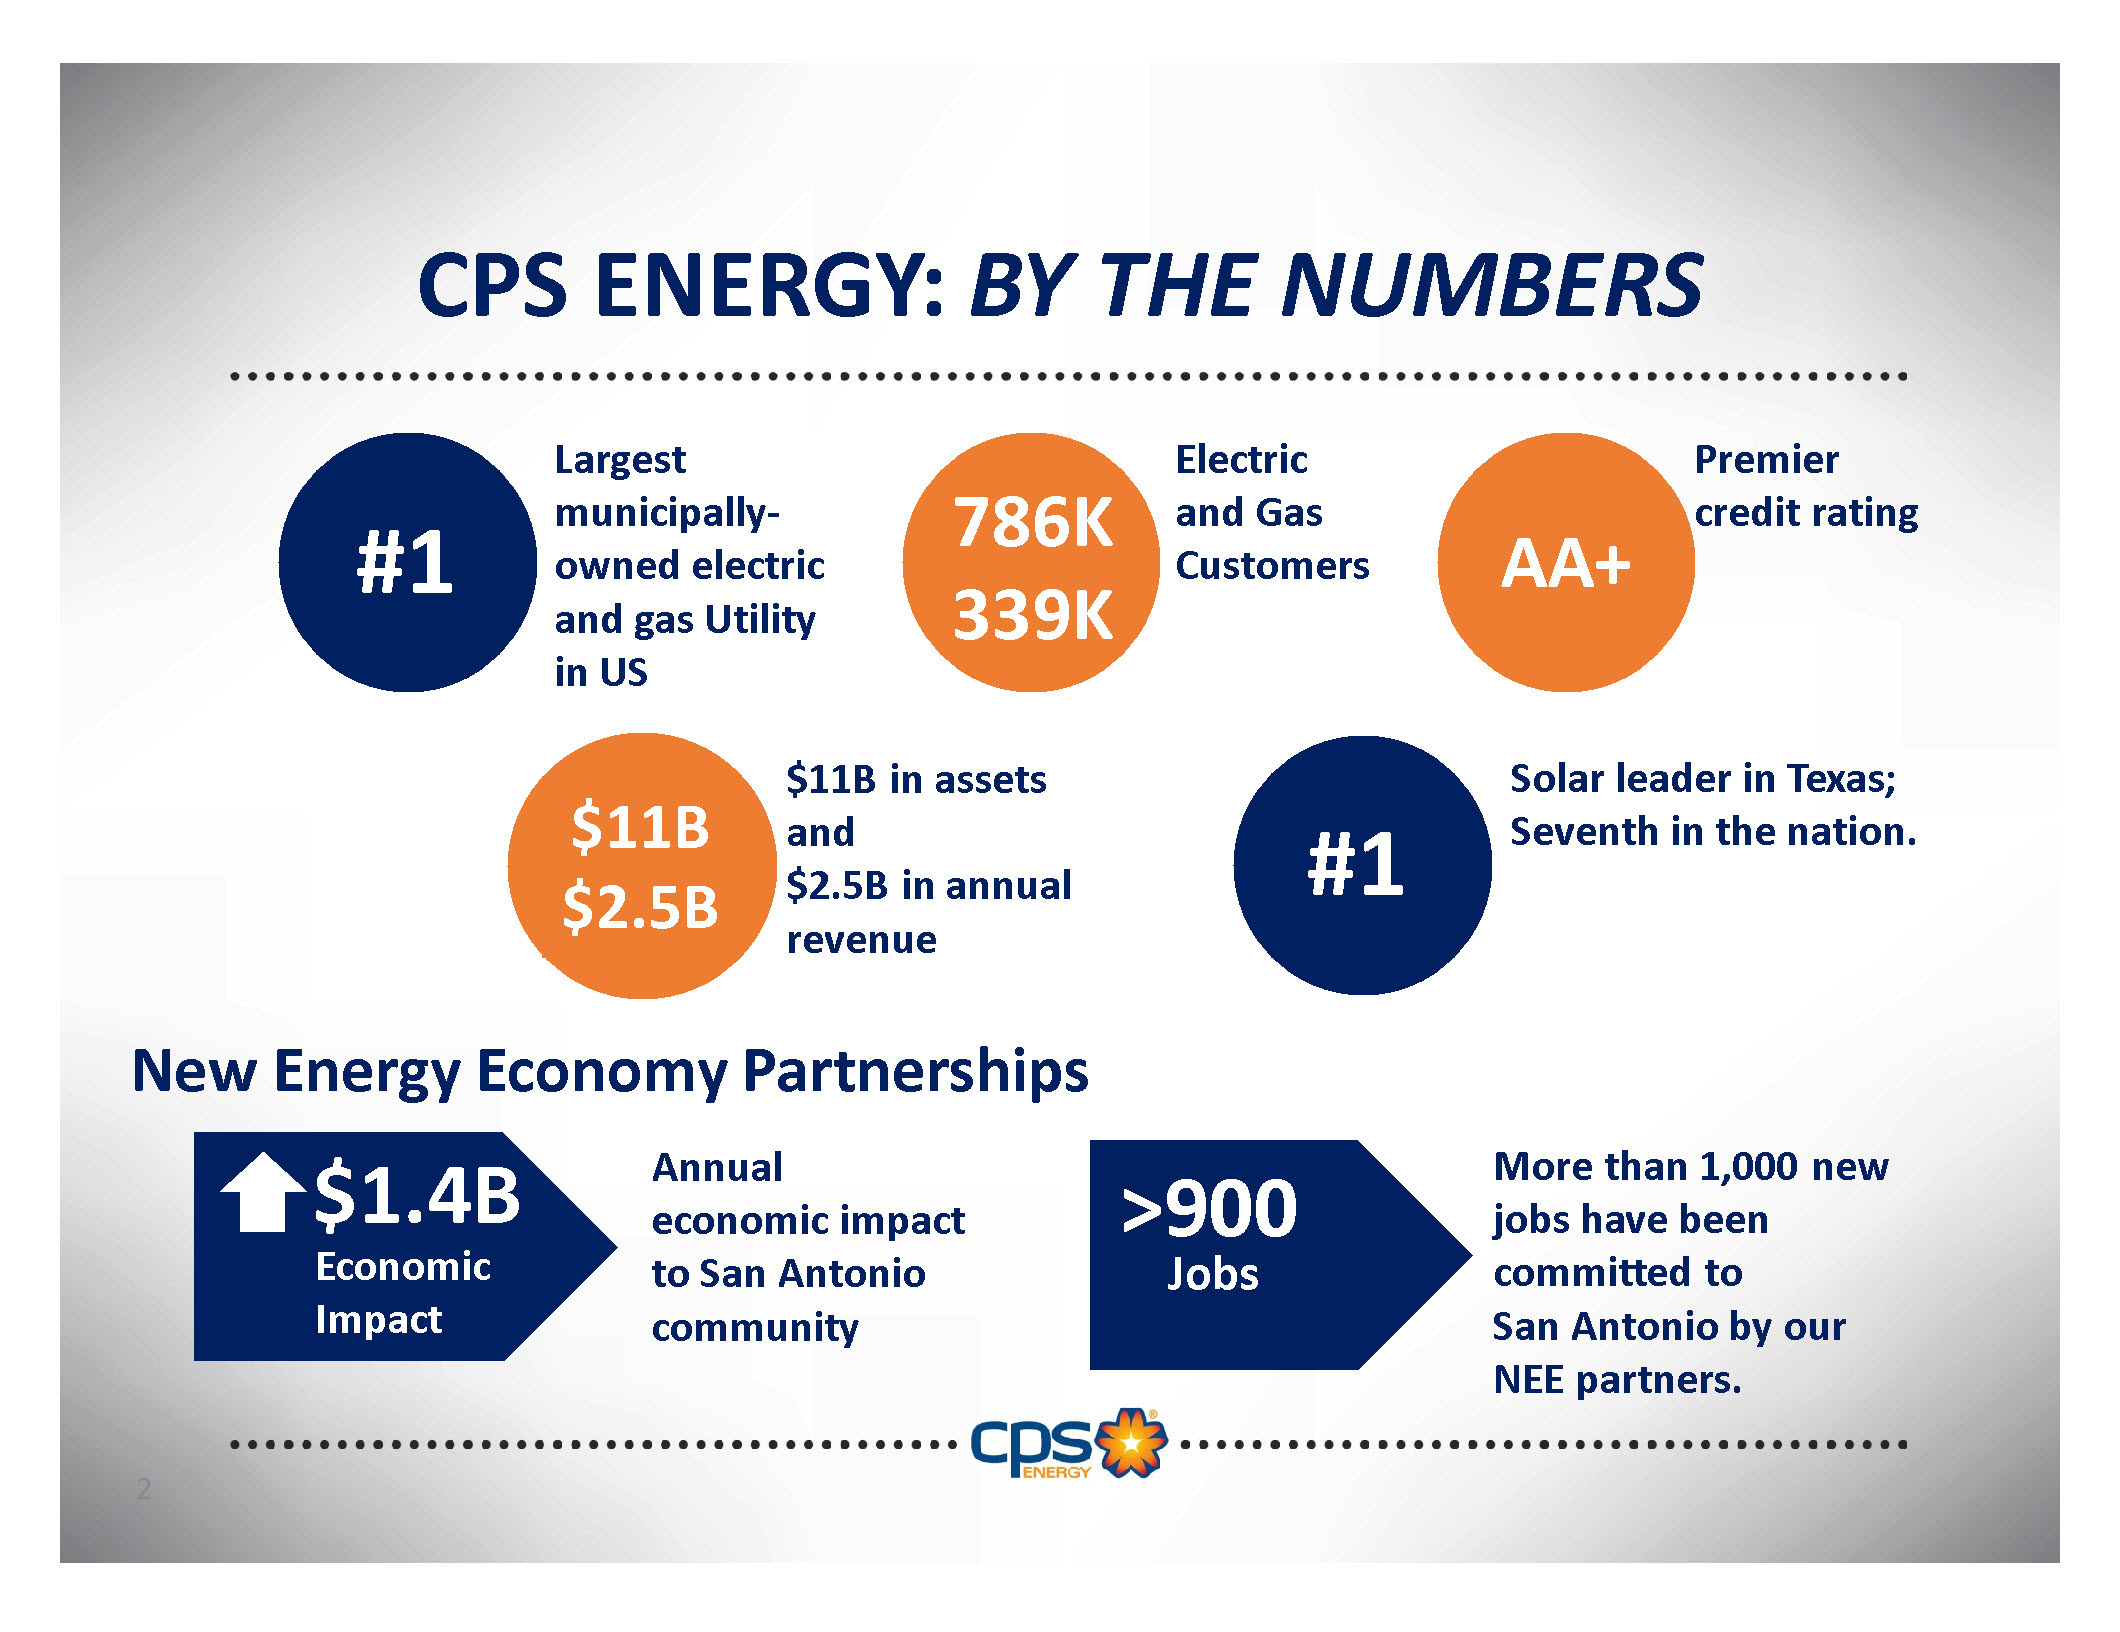 Image of CPS Energy stats